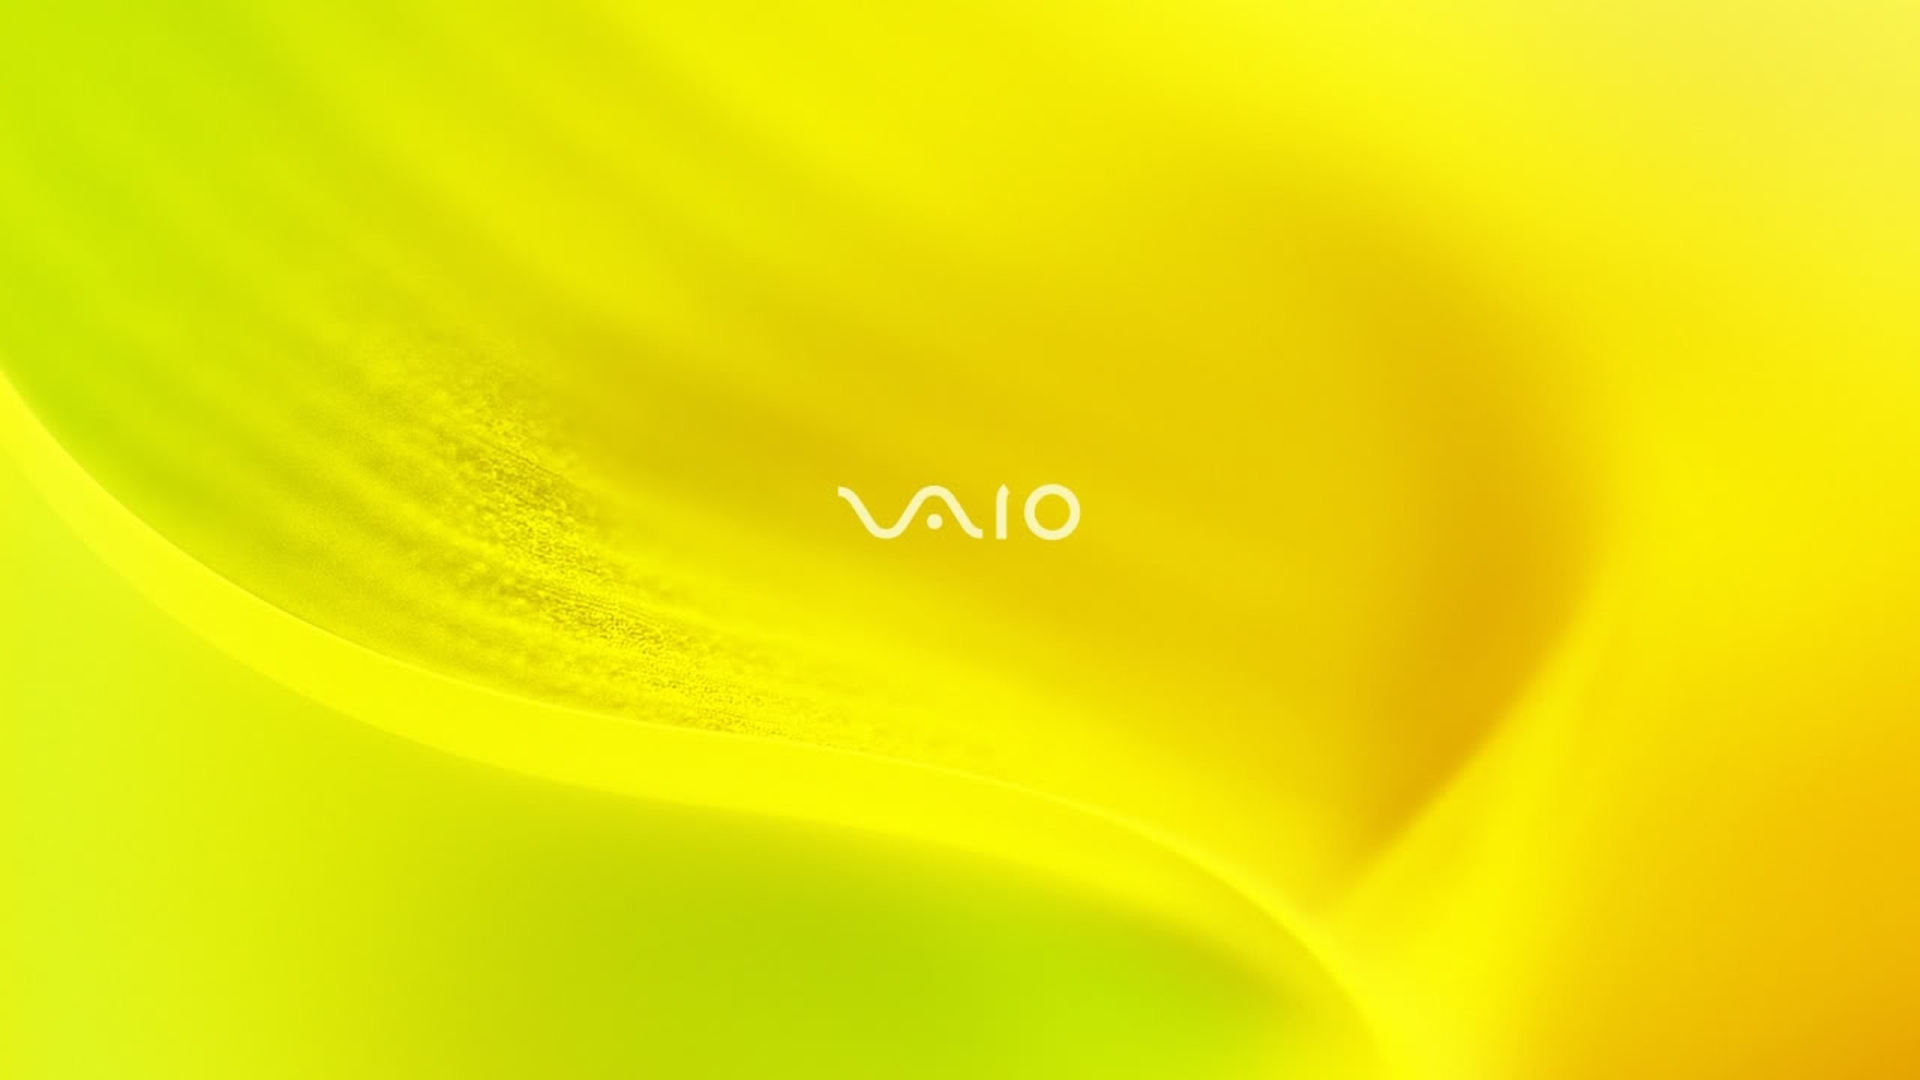 19x1080 Sony Vaio Yellow System 1080p Laptop Full Hd Wallpaper Hd Hi Tech 4k Wallpapers Images Photos And Background